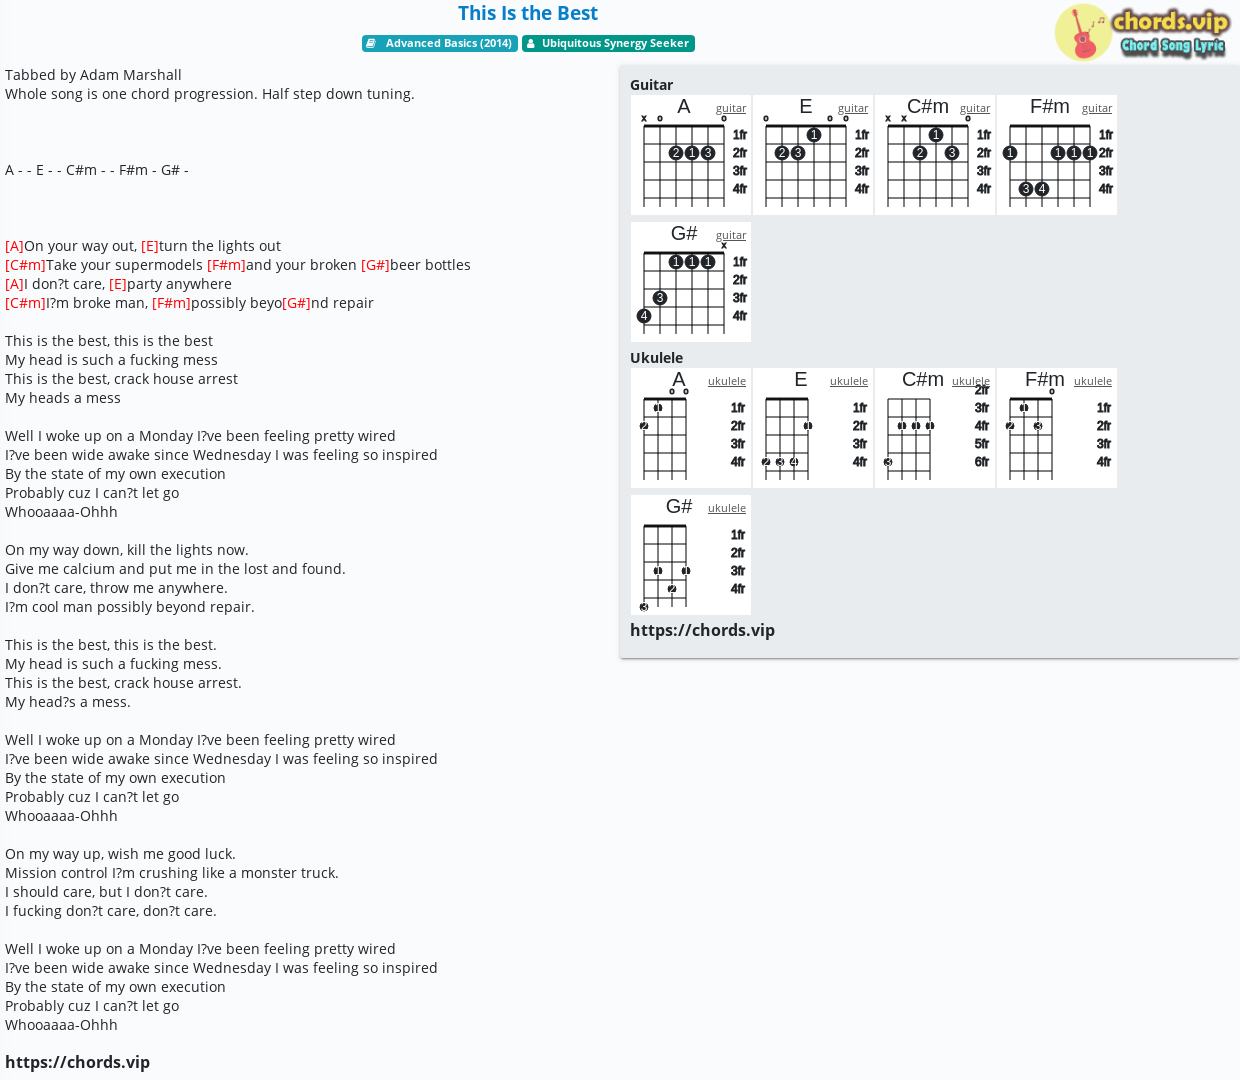 Chord This Is The Best Ubiquitous Synergy Seeker Tab Song Lyric Sheet Guitar Ukulele Chords Vip